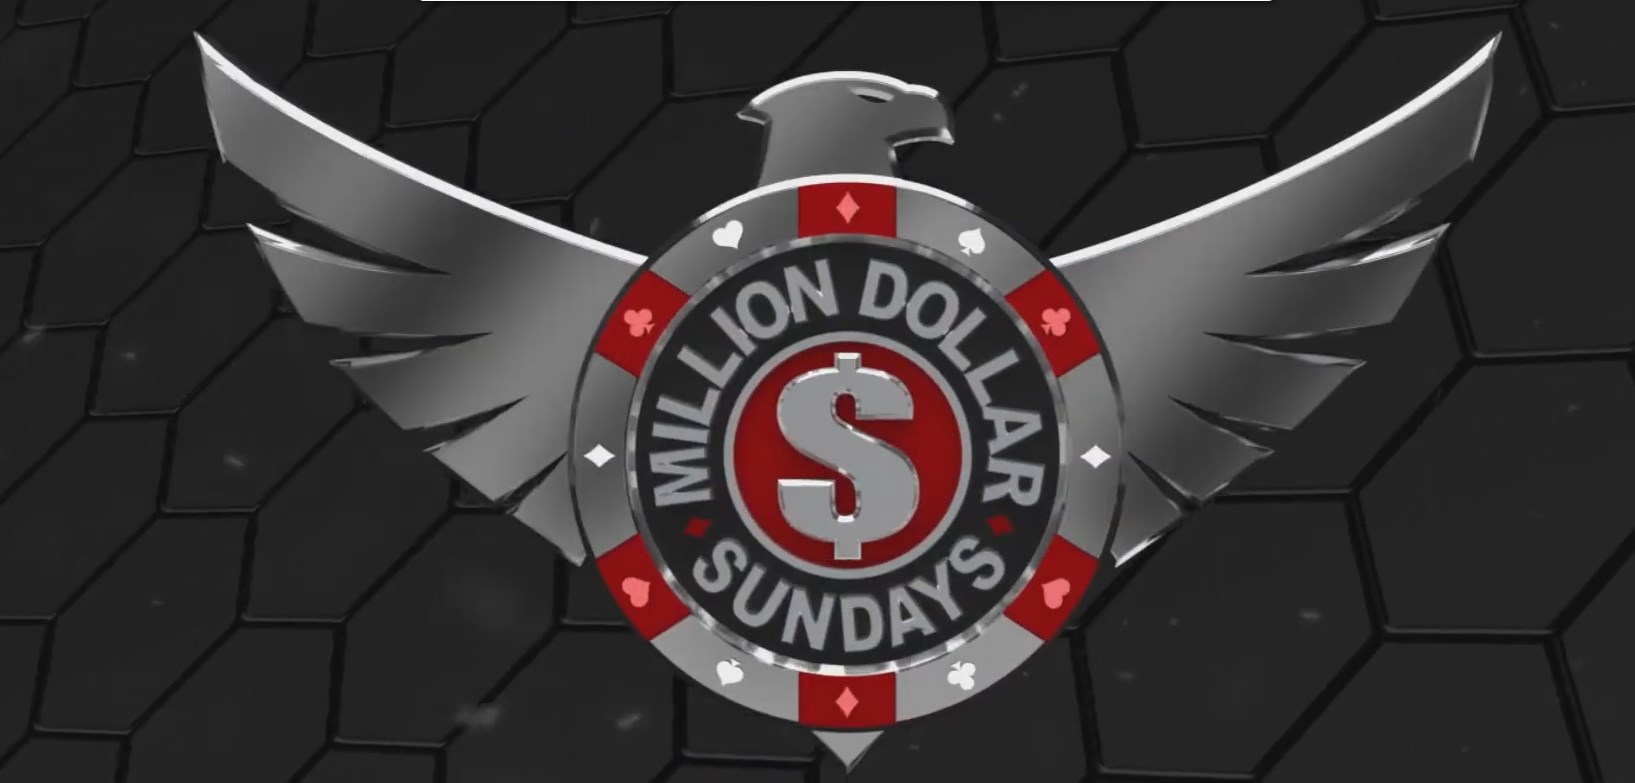 Large-scale update of Winning Poker: setting up the lobby, staking through the client and own Sunday Million